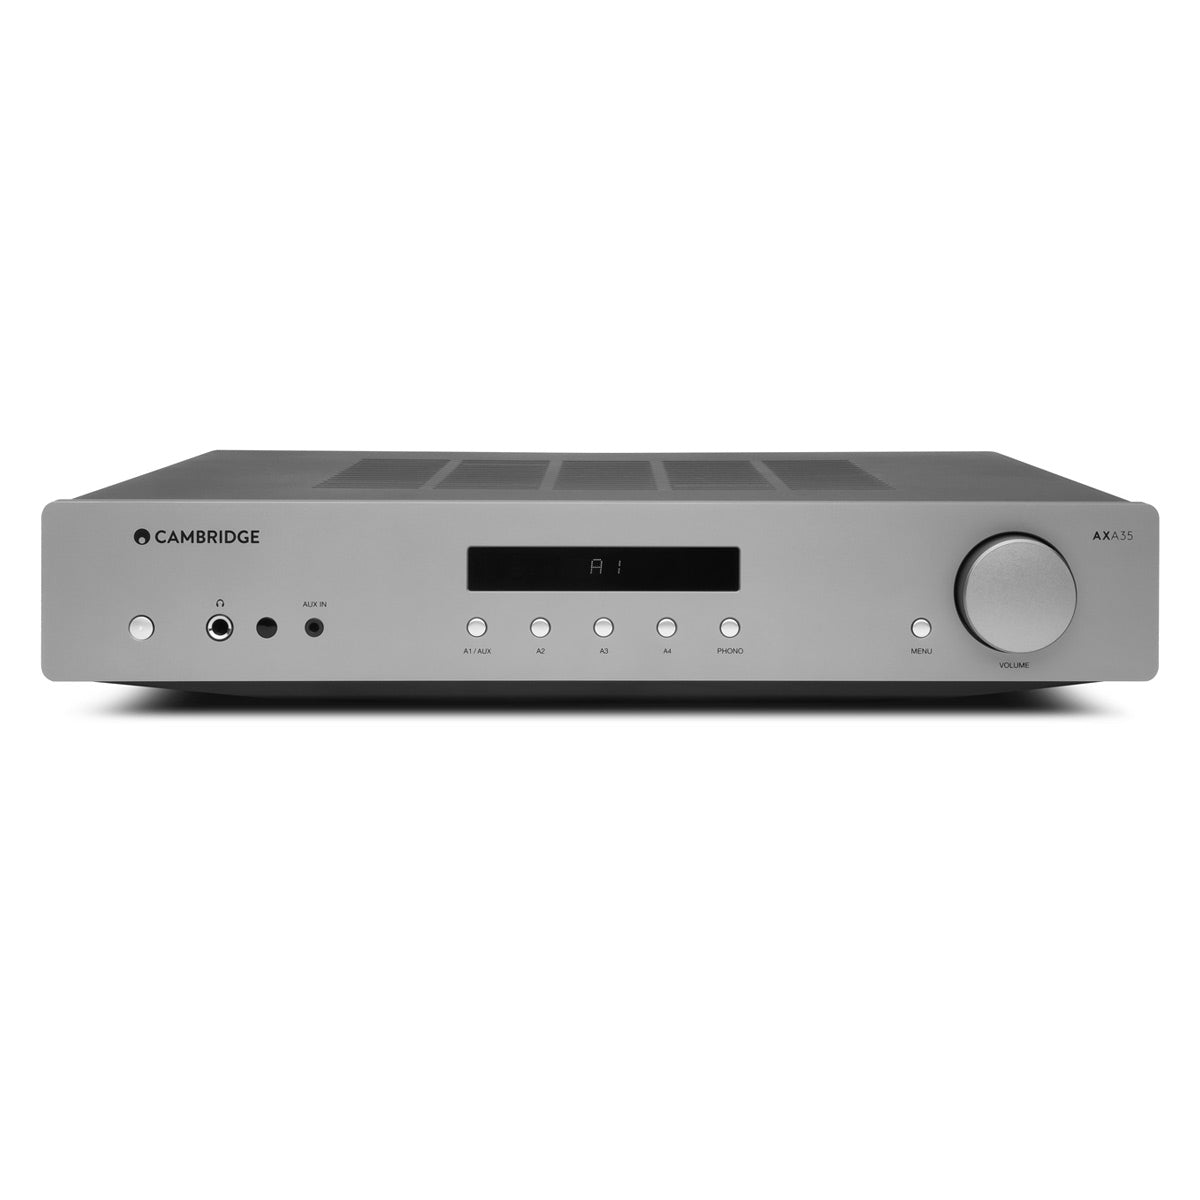 Yamaha A-S301 Stereo integrated amplifier with built-in DAC at